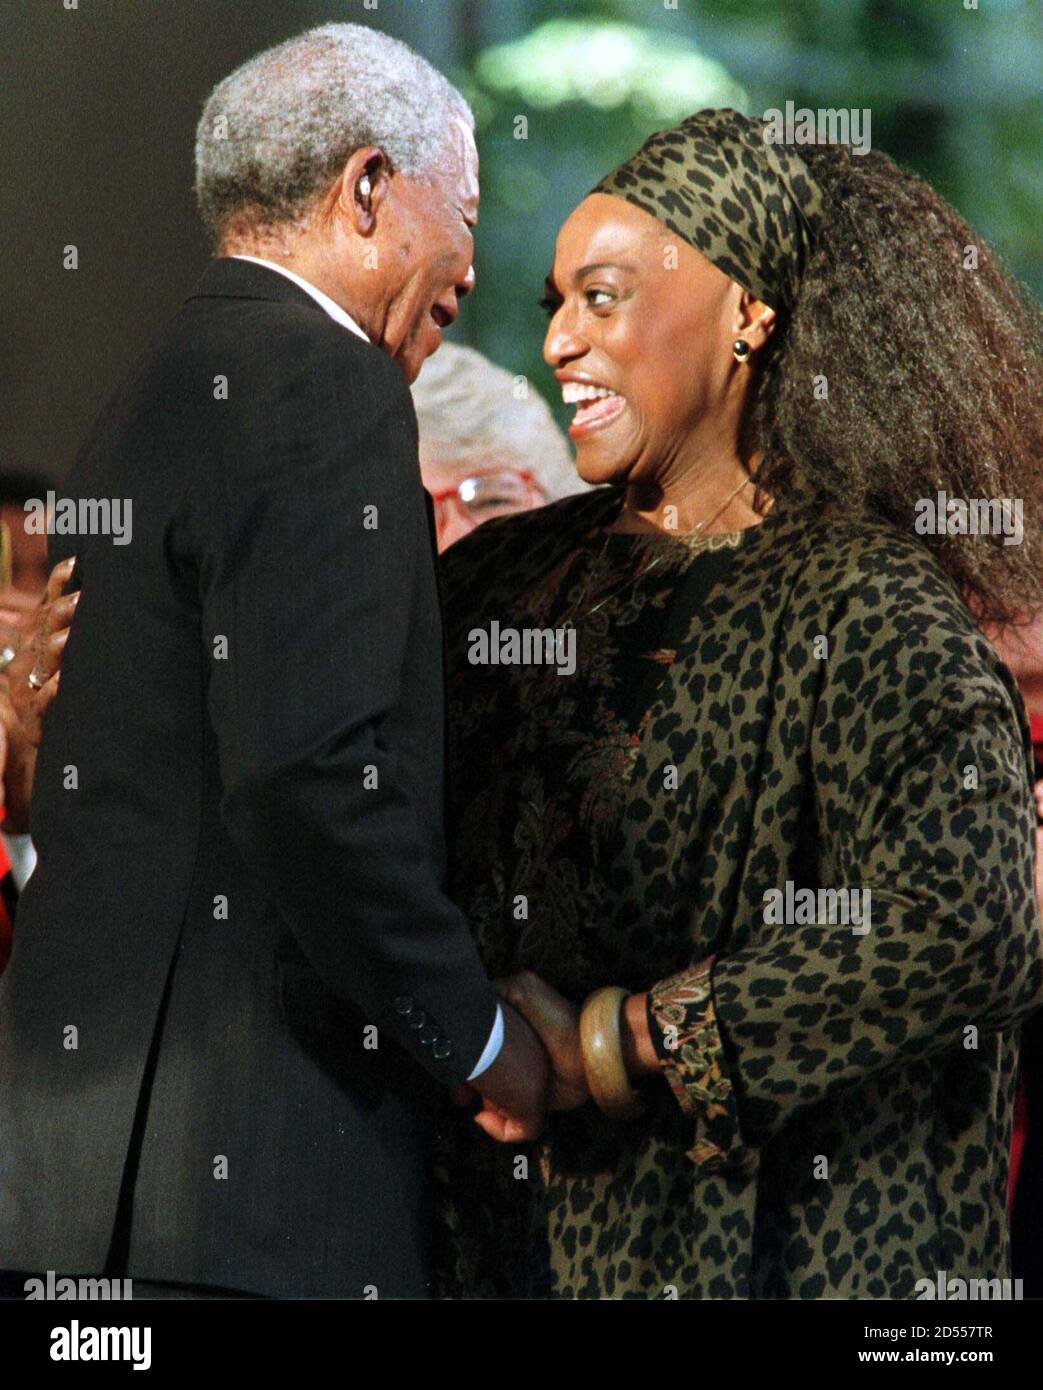 South Africa's President Nelson Mandela hugs opera diva Jessye Norman after she sang an a cappella version of "Amazing Grace" honor of the during specially convened ceremonies Mandela September